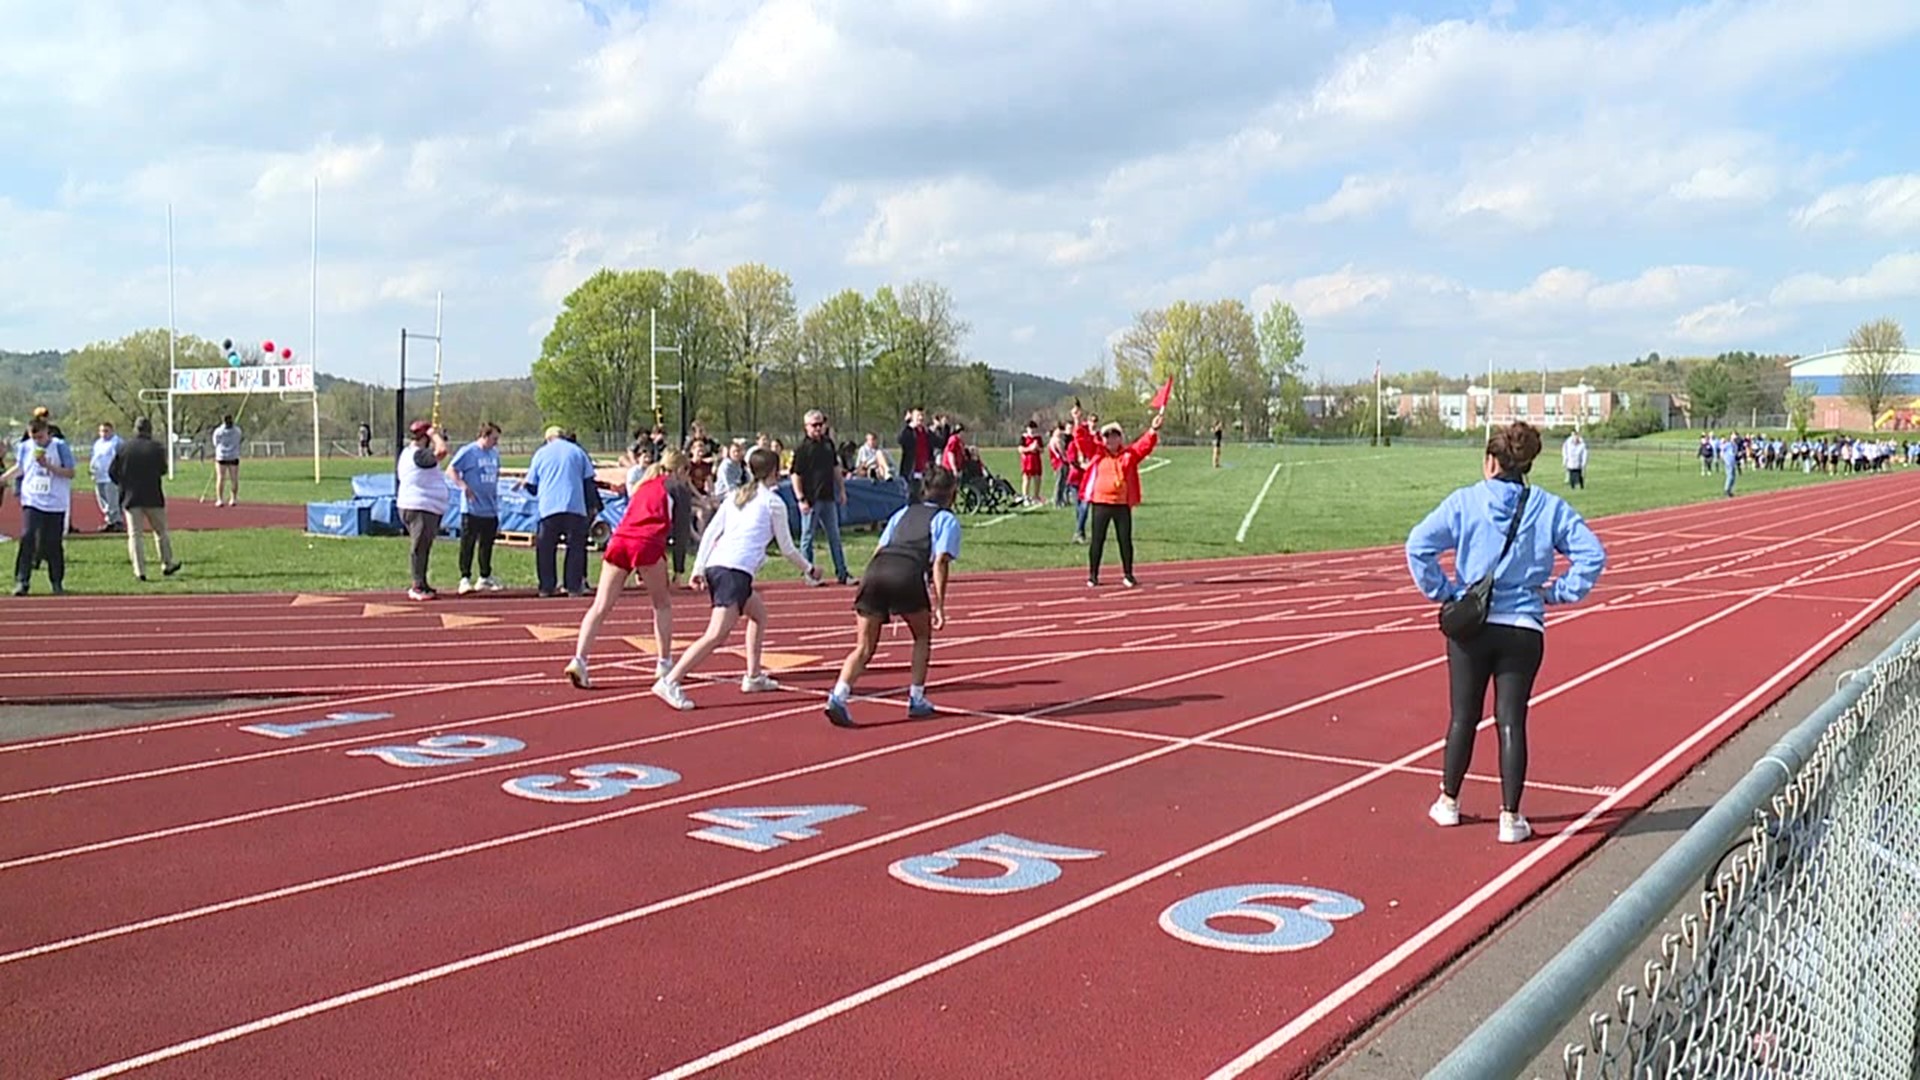 Dallas High School formed a Unified Track and Field Team. The team is sponsored by the Special Olympics.